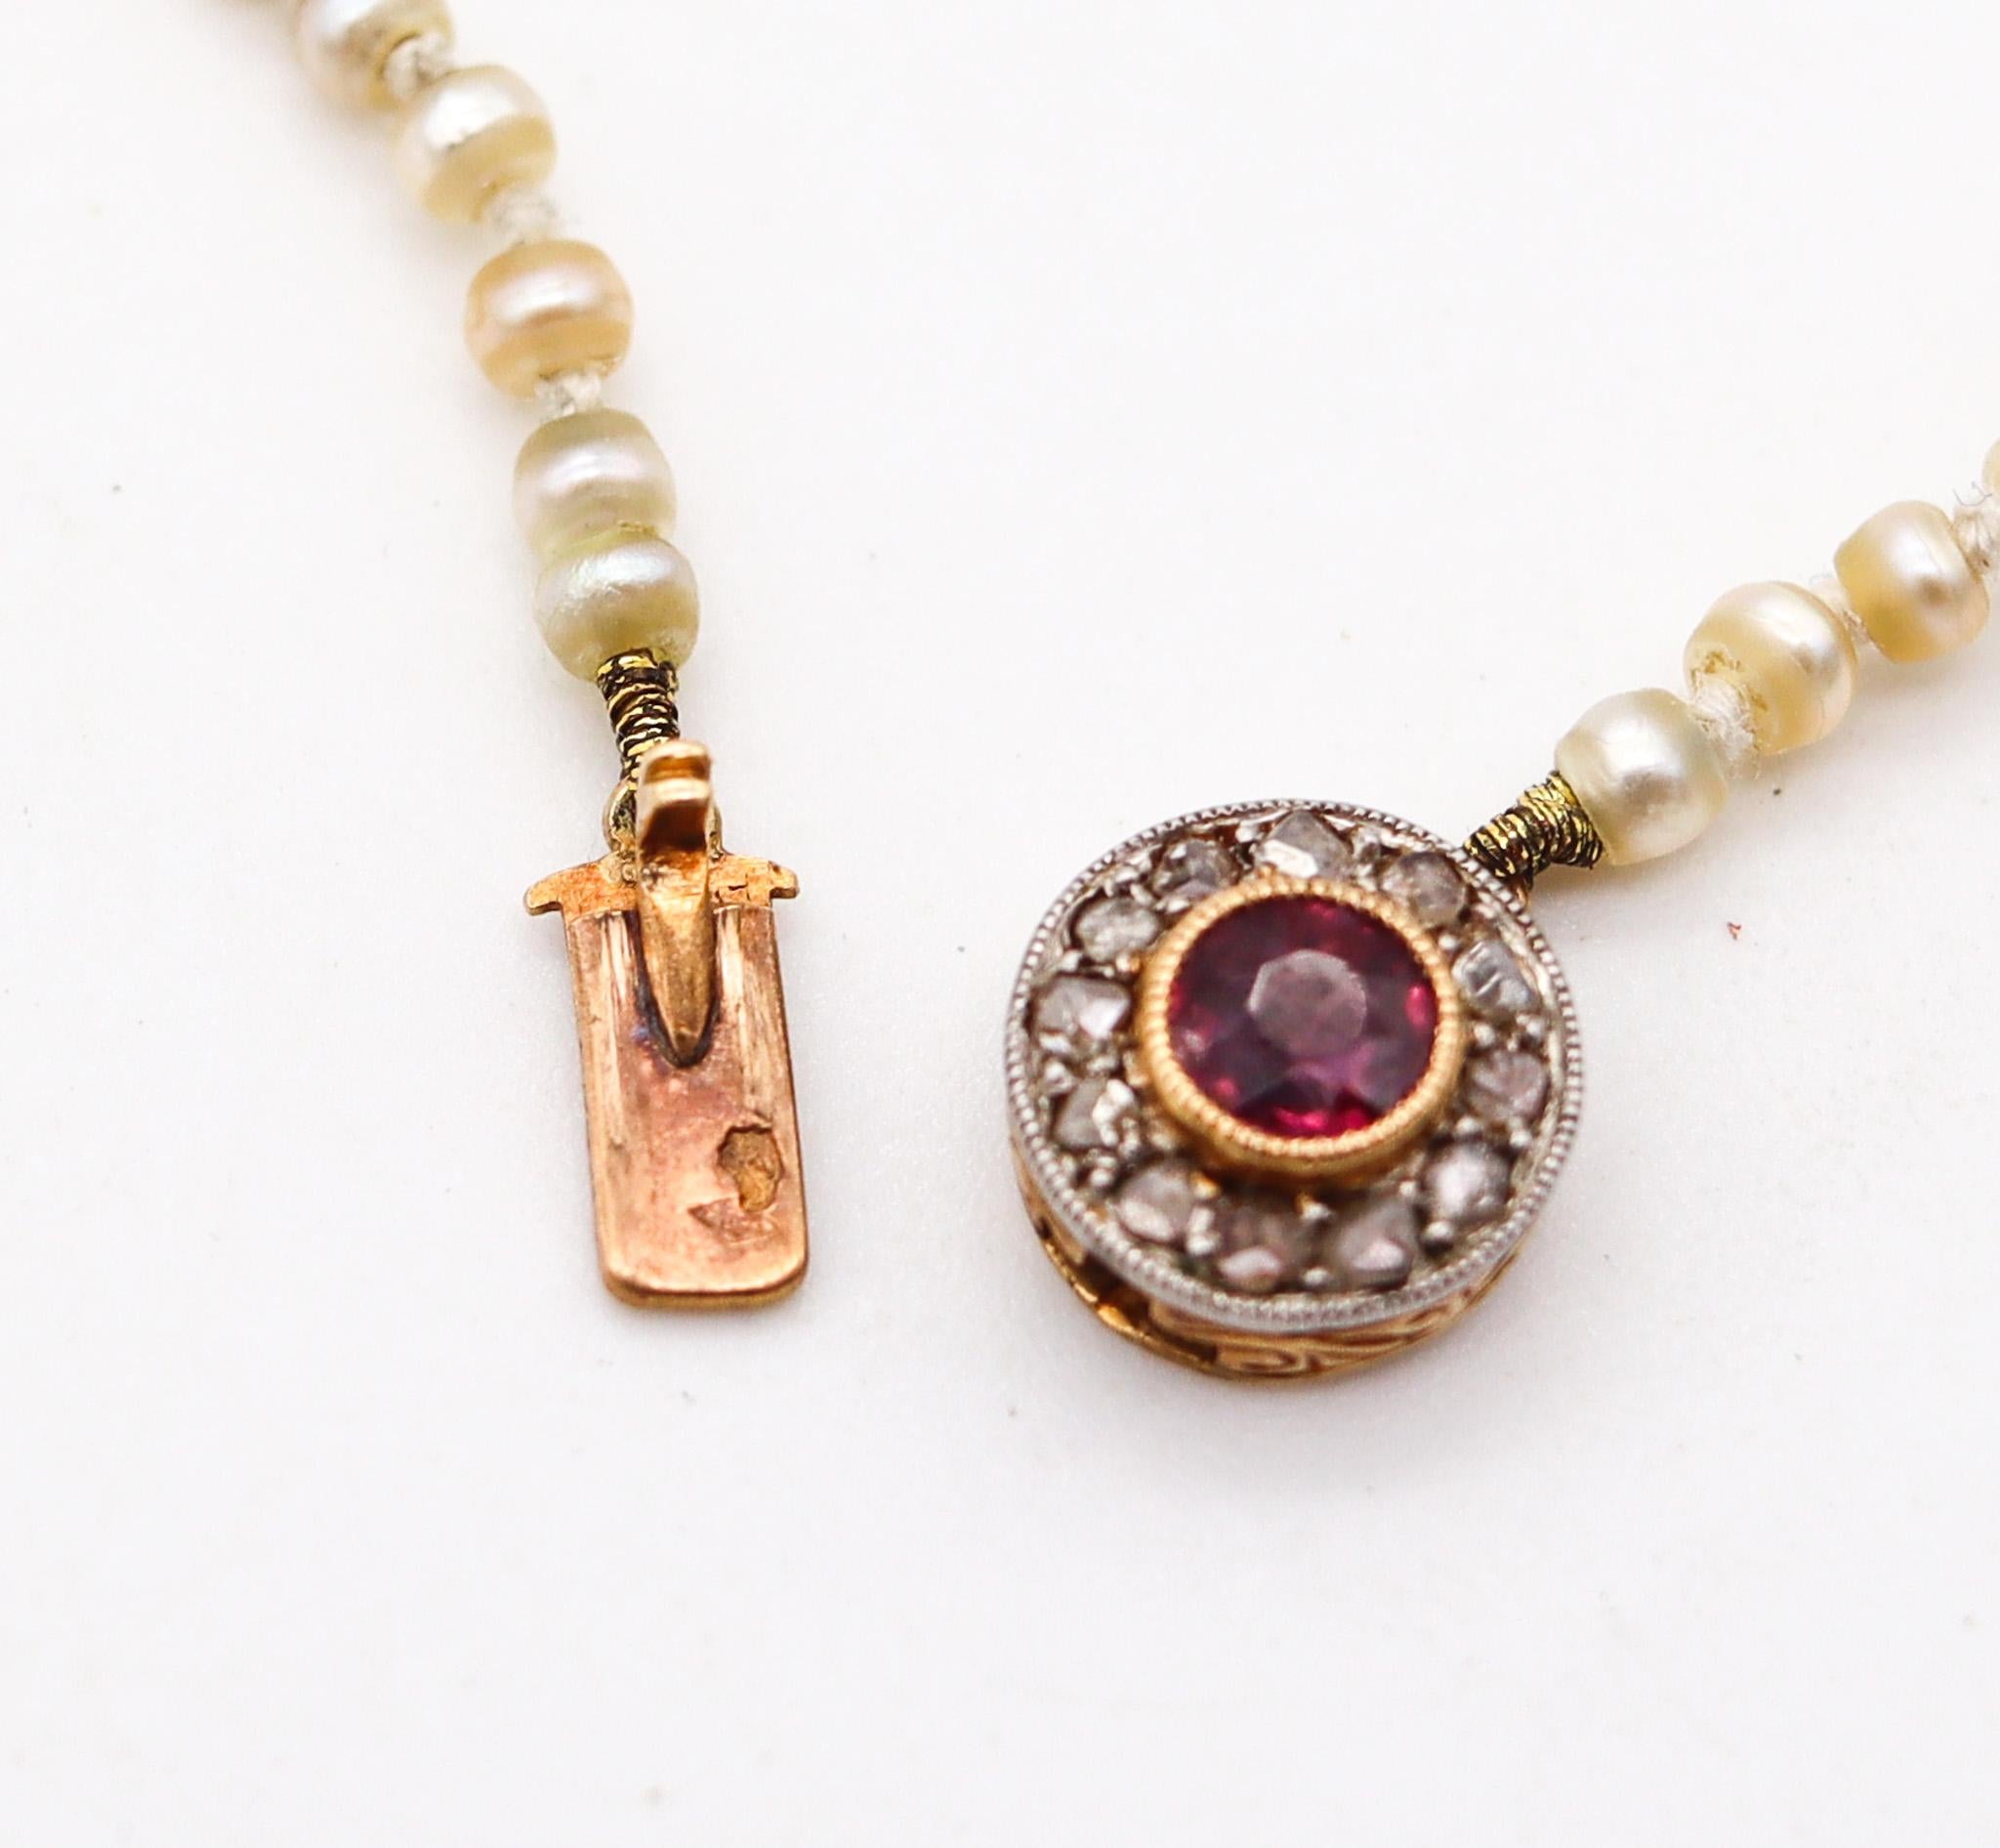 French 1900 Edwardian Natural Pearls Necklace In 18Kt Gold With Diamonds & Ruby For Sale 1